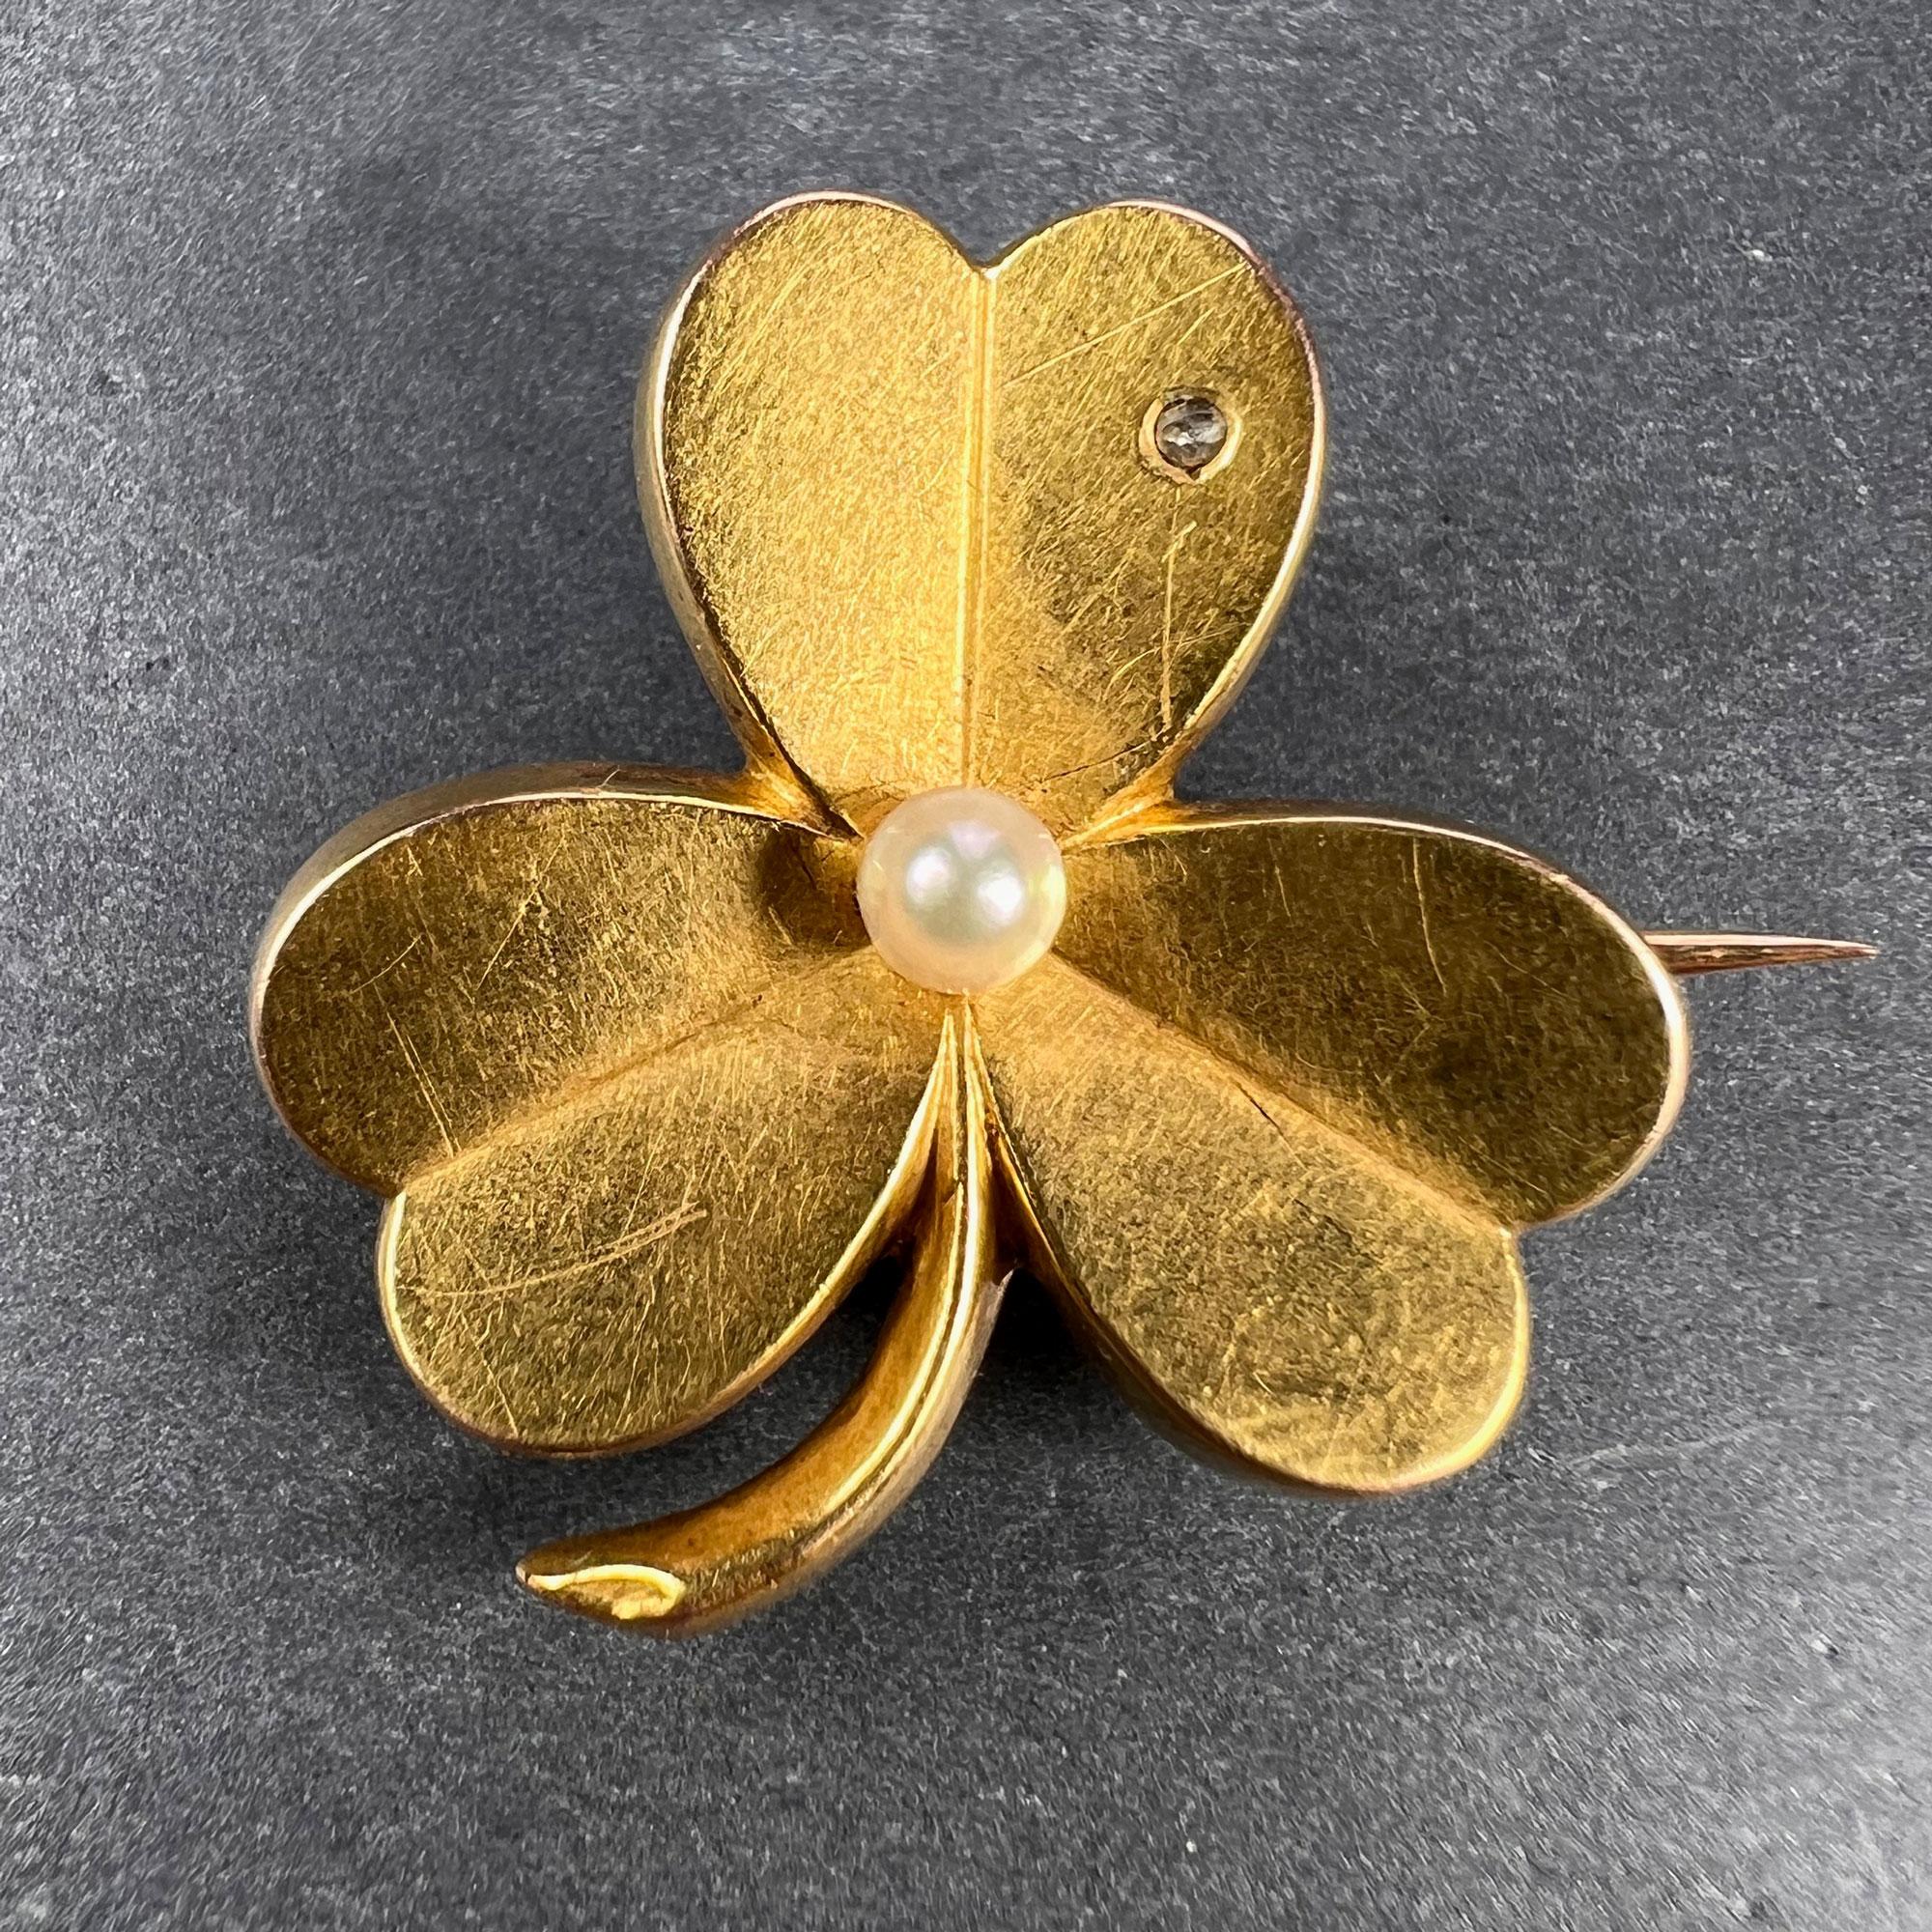 A French 18 karat (18K) yellow gold brooch with pendant fitting designed as a clover or shamrock set with a rose-cut diamond weighing approximately 0.03 carats and a natural pearl measuring 3.5mm. Stamped with the eagle mark for 18 karat gold and